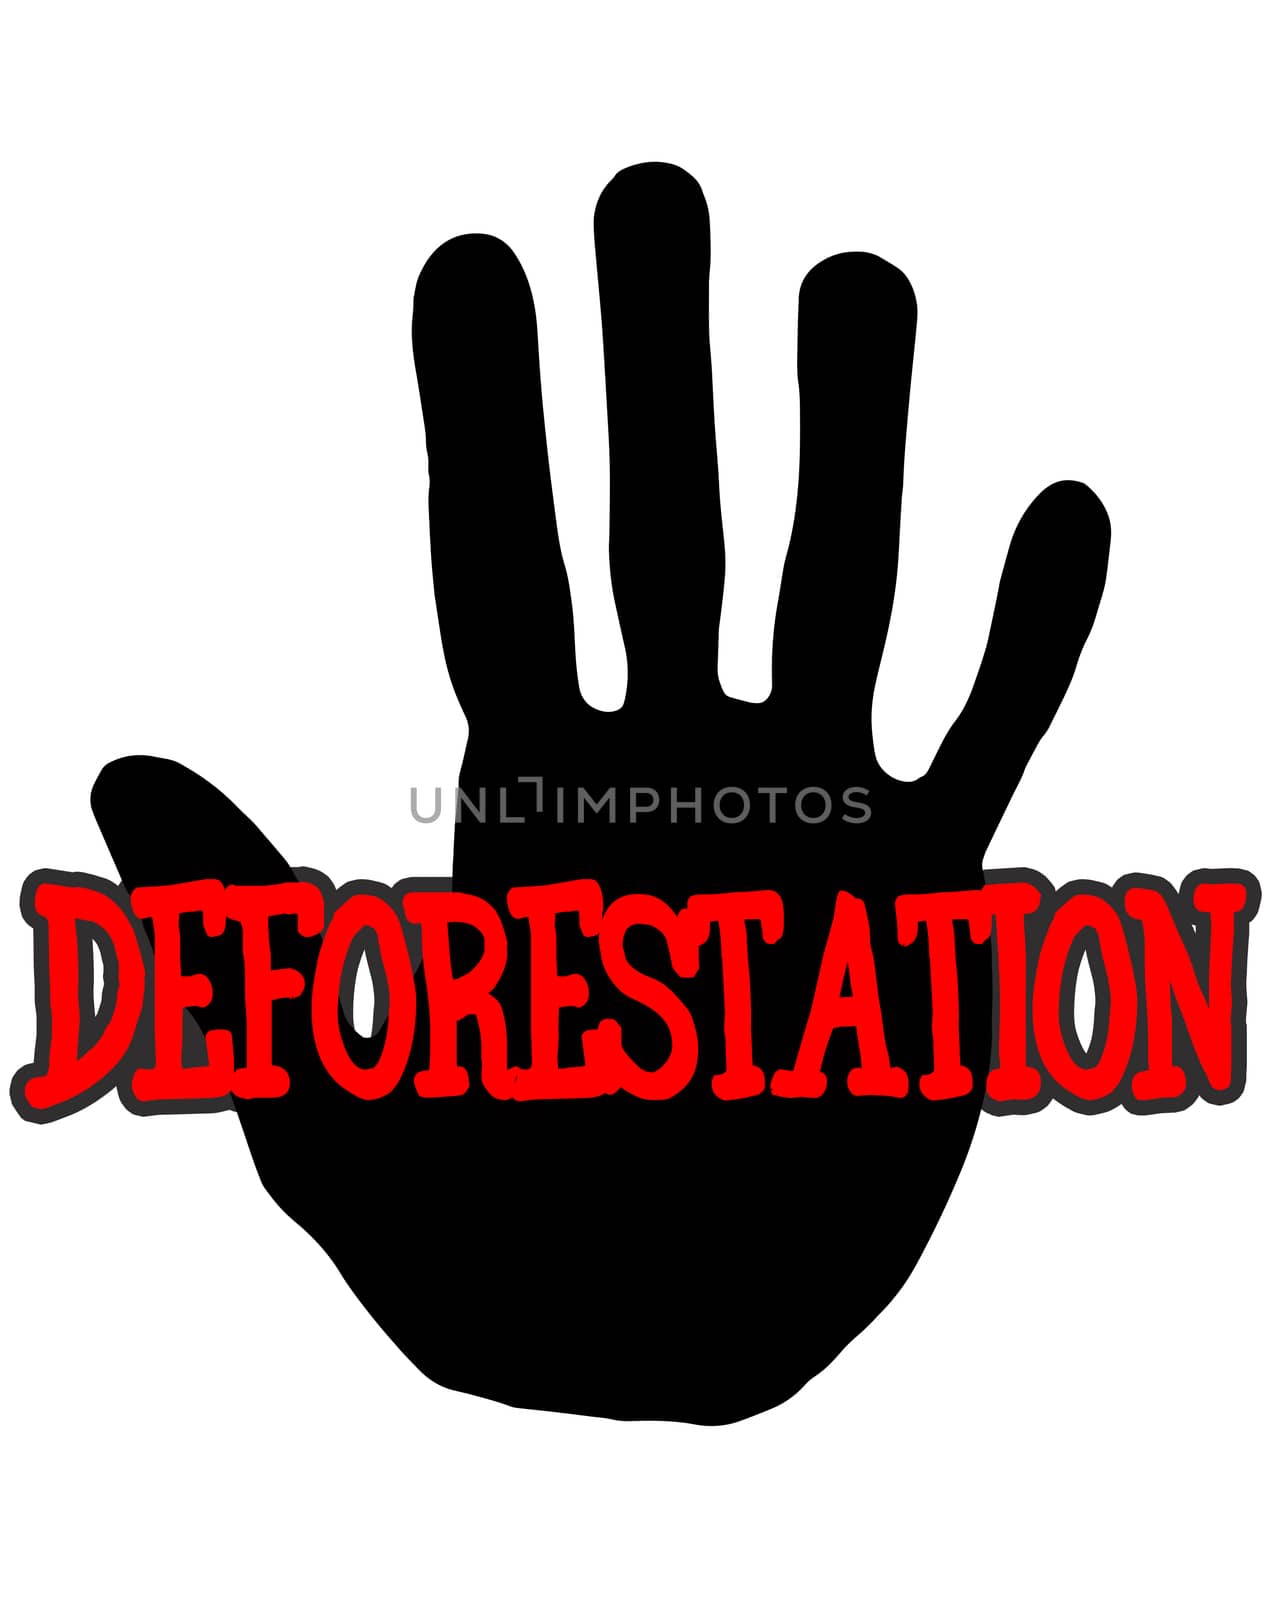 Man handprint isolated on white background showing stop deforestation